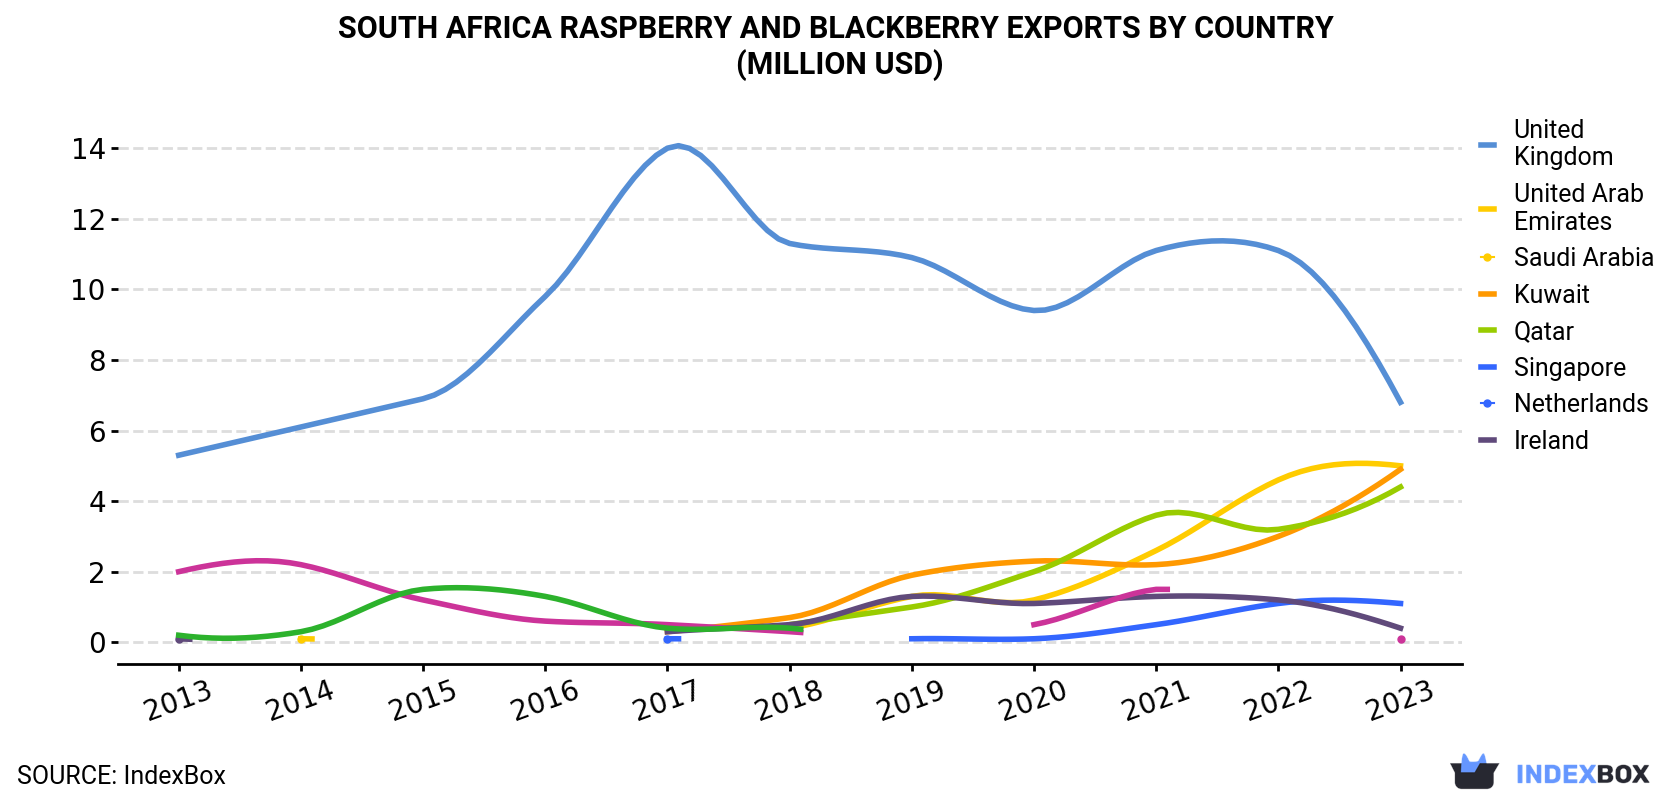 South Africa Raspberry And Blackberry Exports By Country (Million USD)